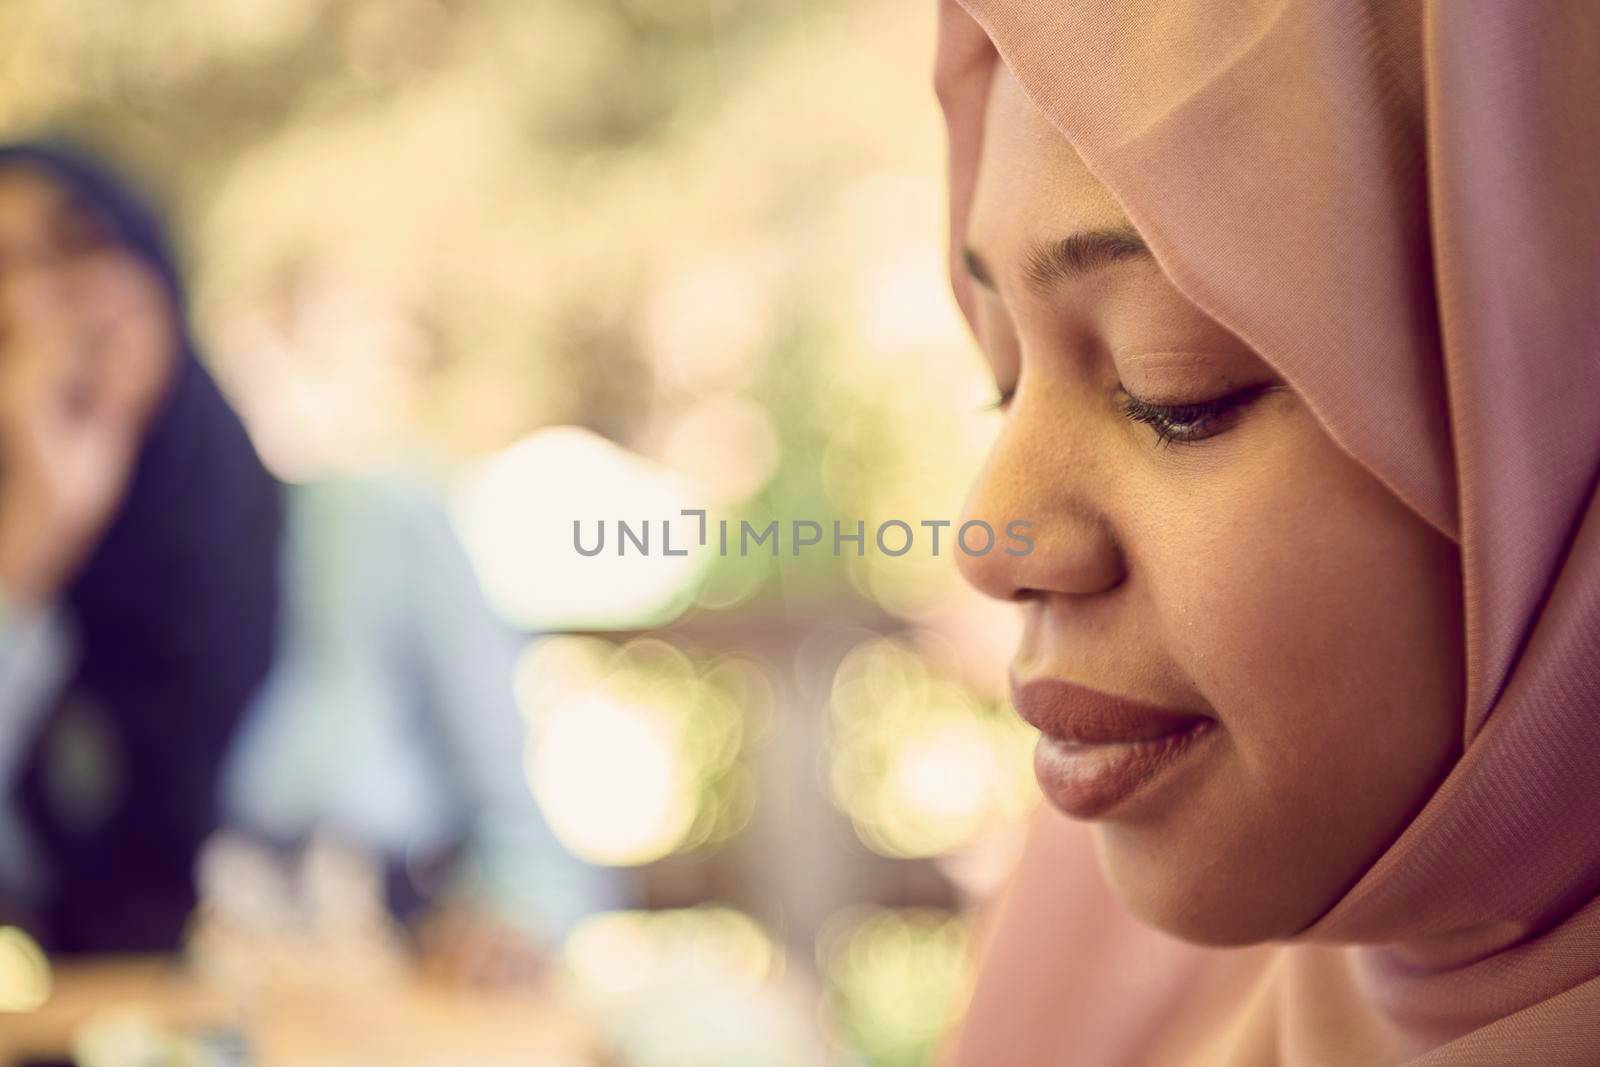 black african businesswoman portrait  wearing traditional Islamic clothes